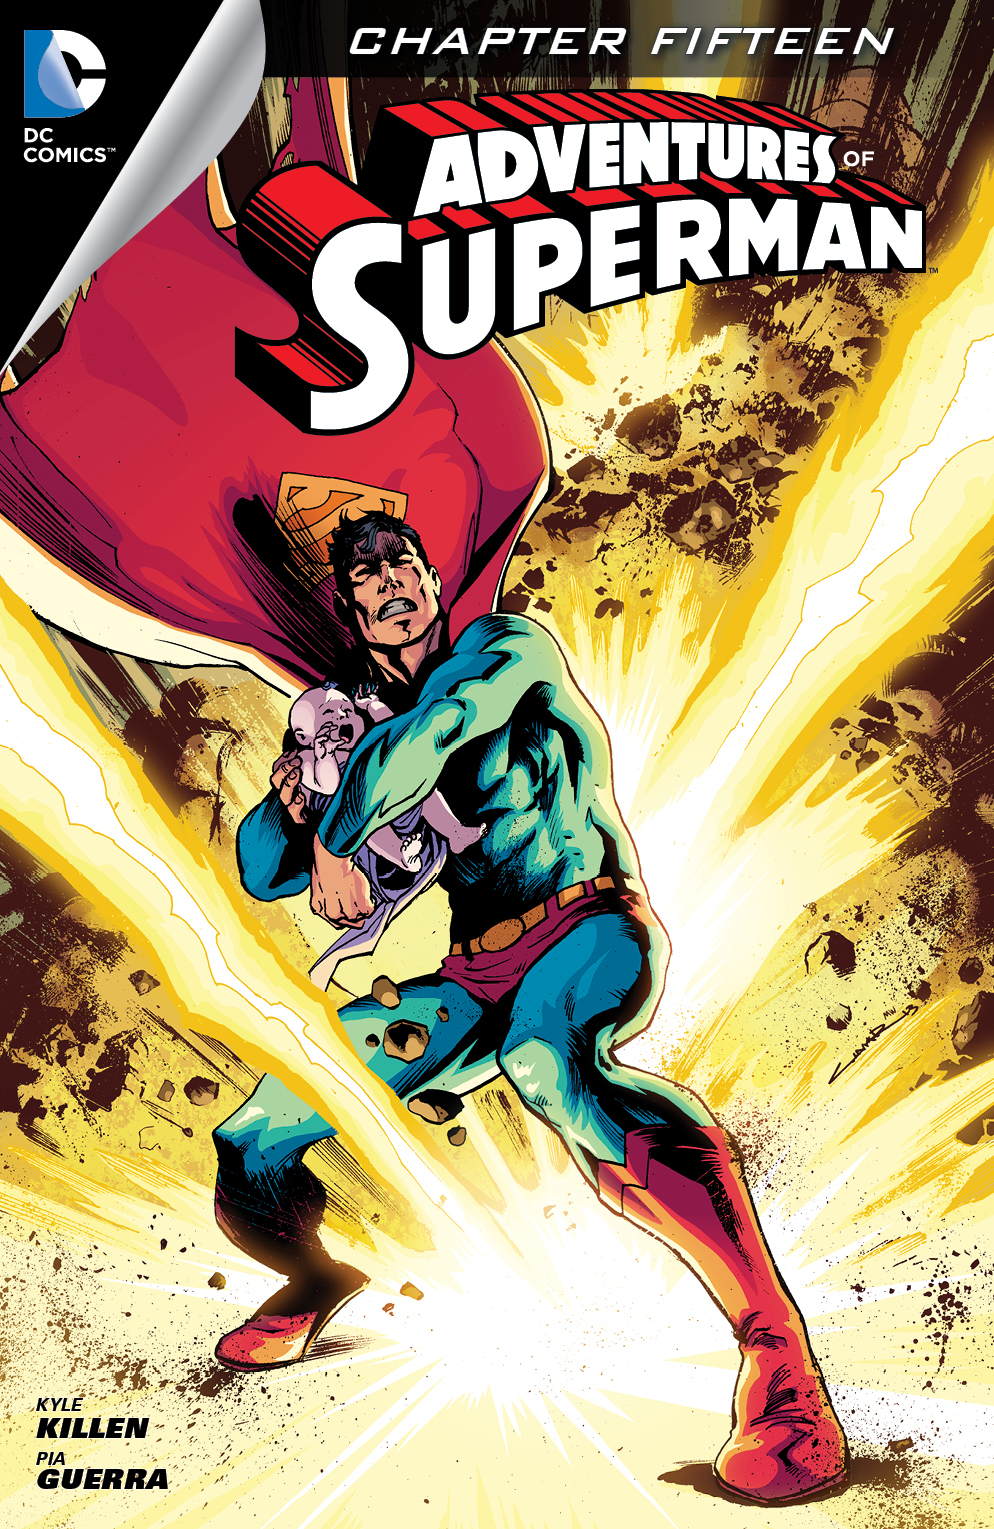 Adventures of Superman (2013-) #15 preview images